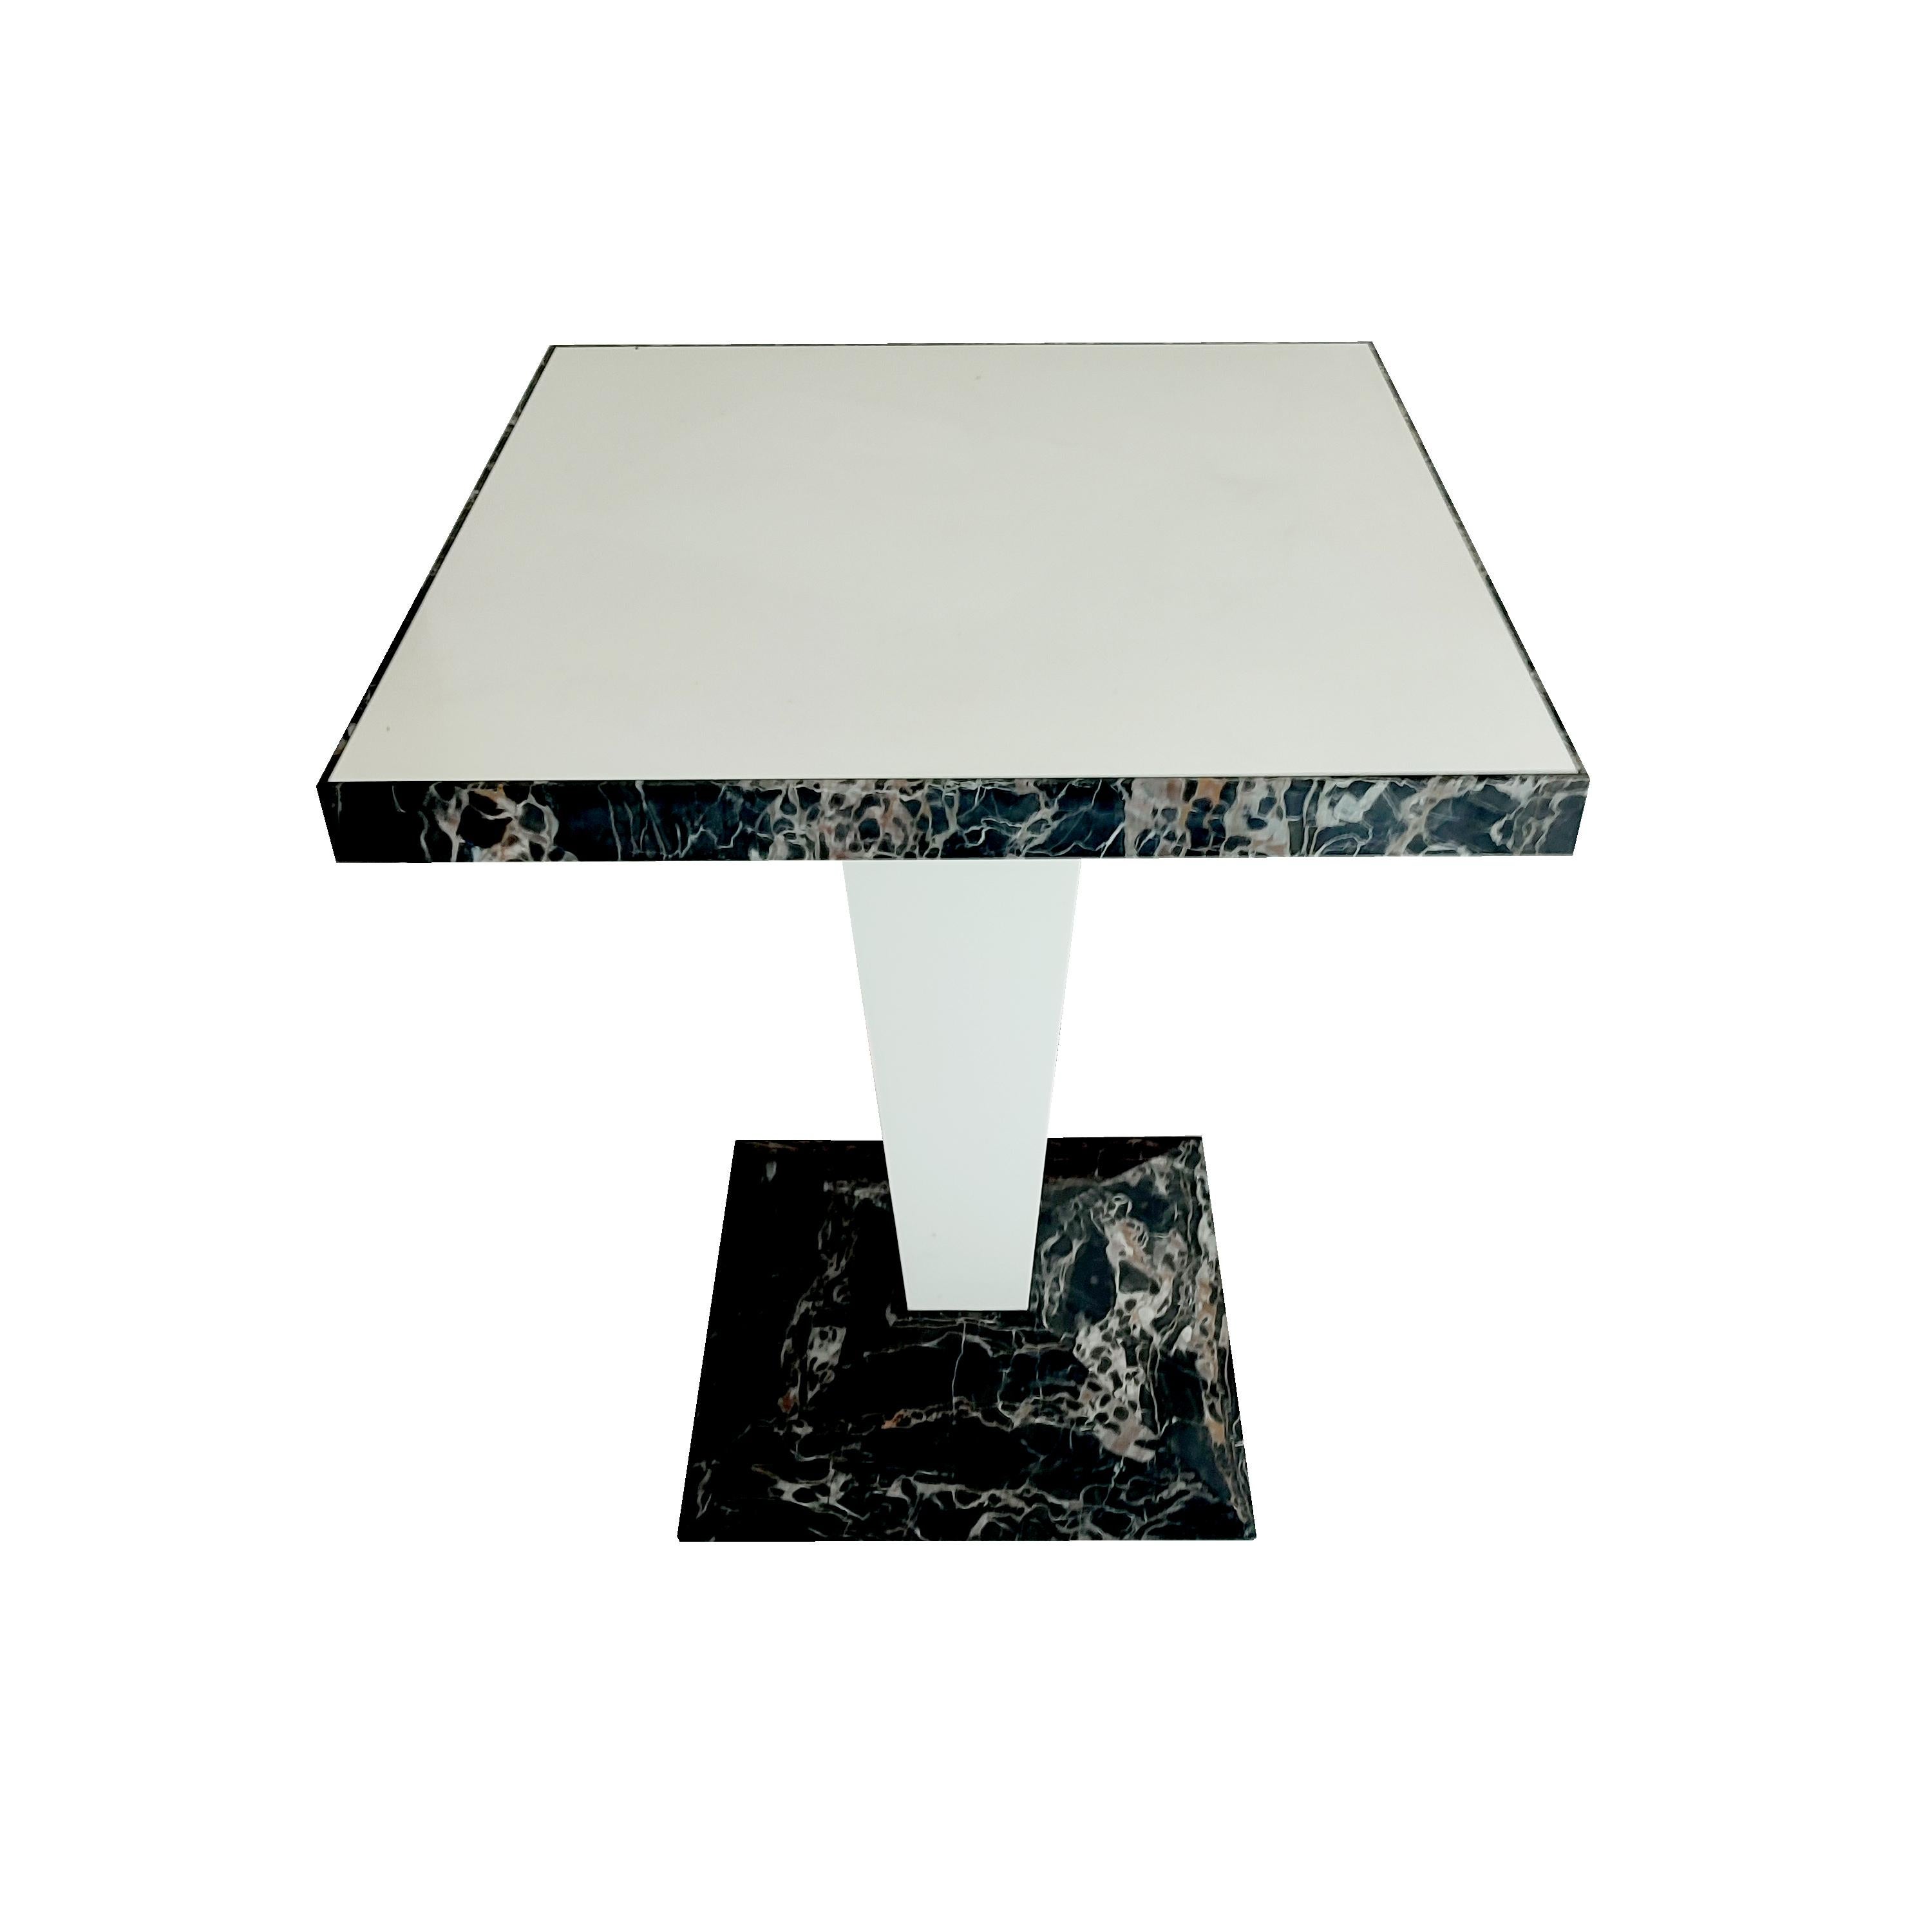 PORTORO Marble Design Table & White Krion by Joaquín Moll Meddel Spain In Stock.
Counter style high table, or work table is made of black Italian Portoro marble, the most expensive black Italian marble in the world. Portoro marble is characterized